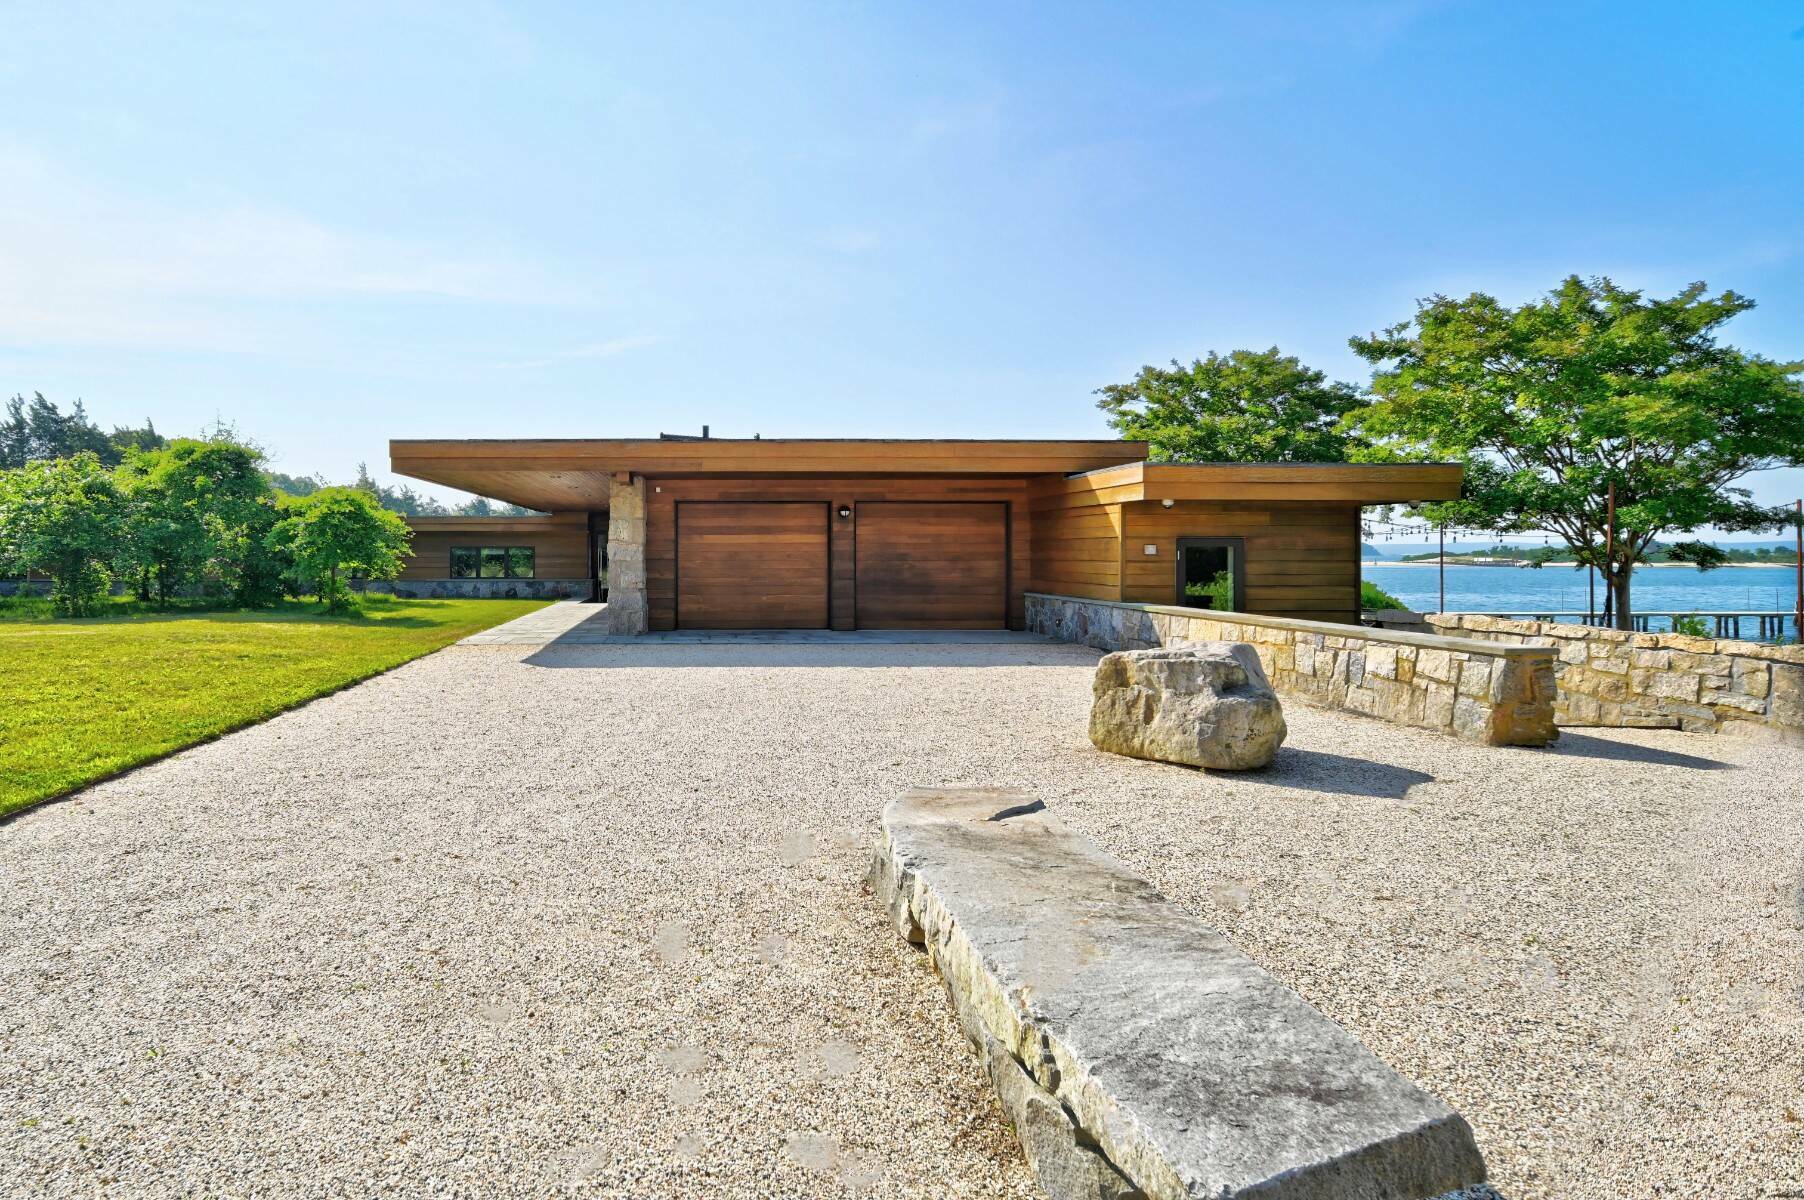 2 Charlie's Lane, Shelter Island. CHRIS FOSTER FOR SOTHEBY'S INTERNATIONAL REALTY